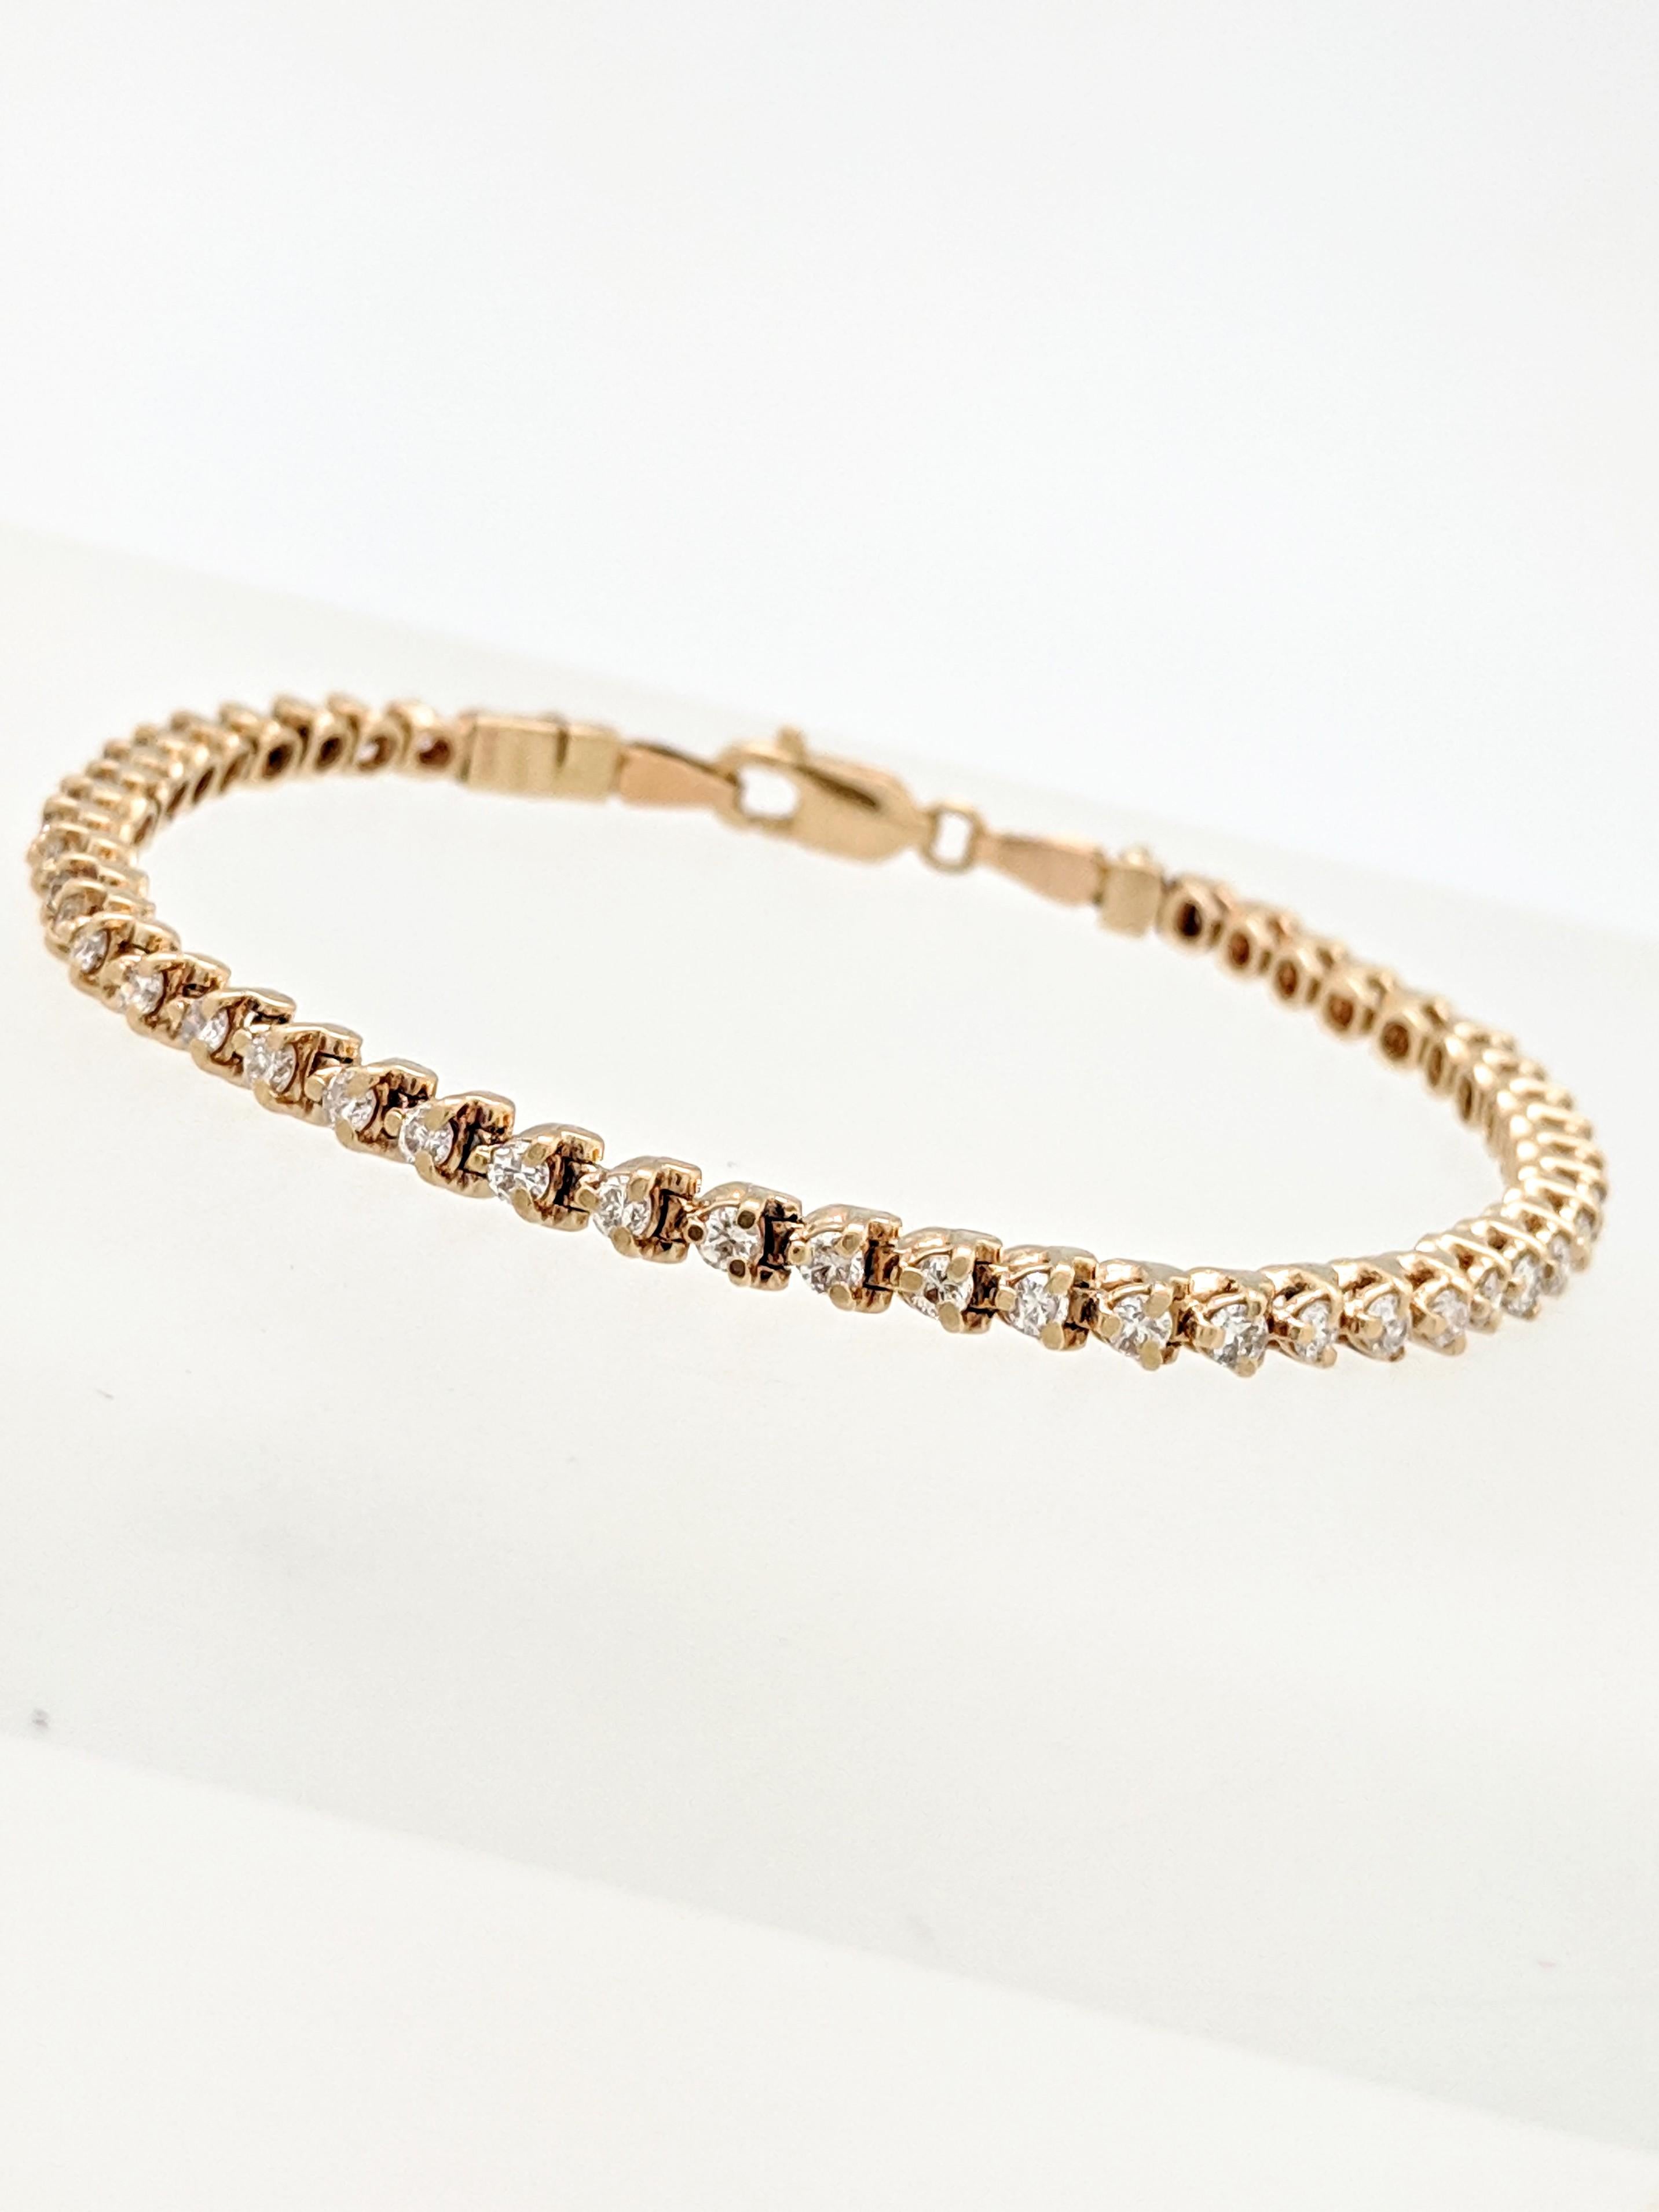 You are viewing a beautiful diamond tennis bracelet.
The bracelet is crafted from 14k yellow gold, measures 3mm in width, 7